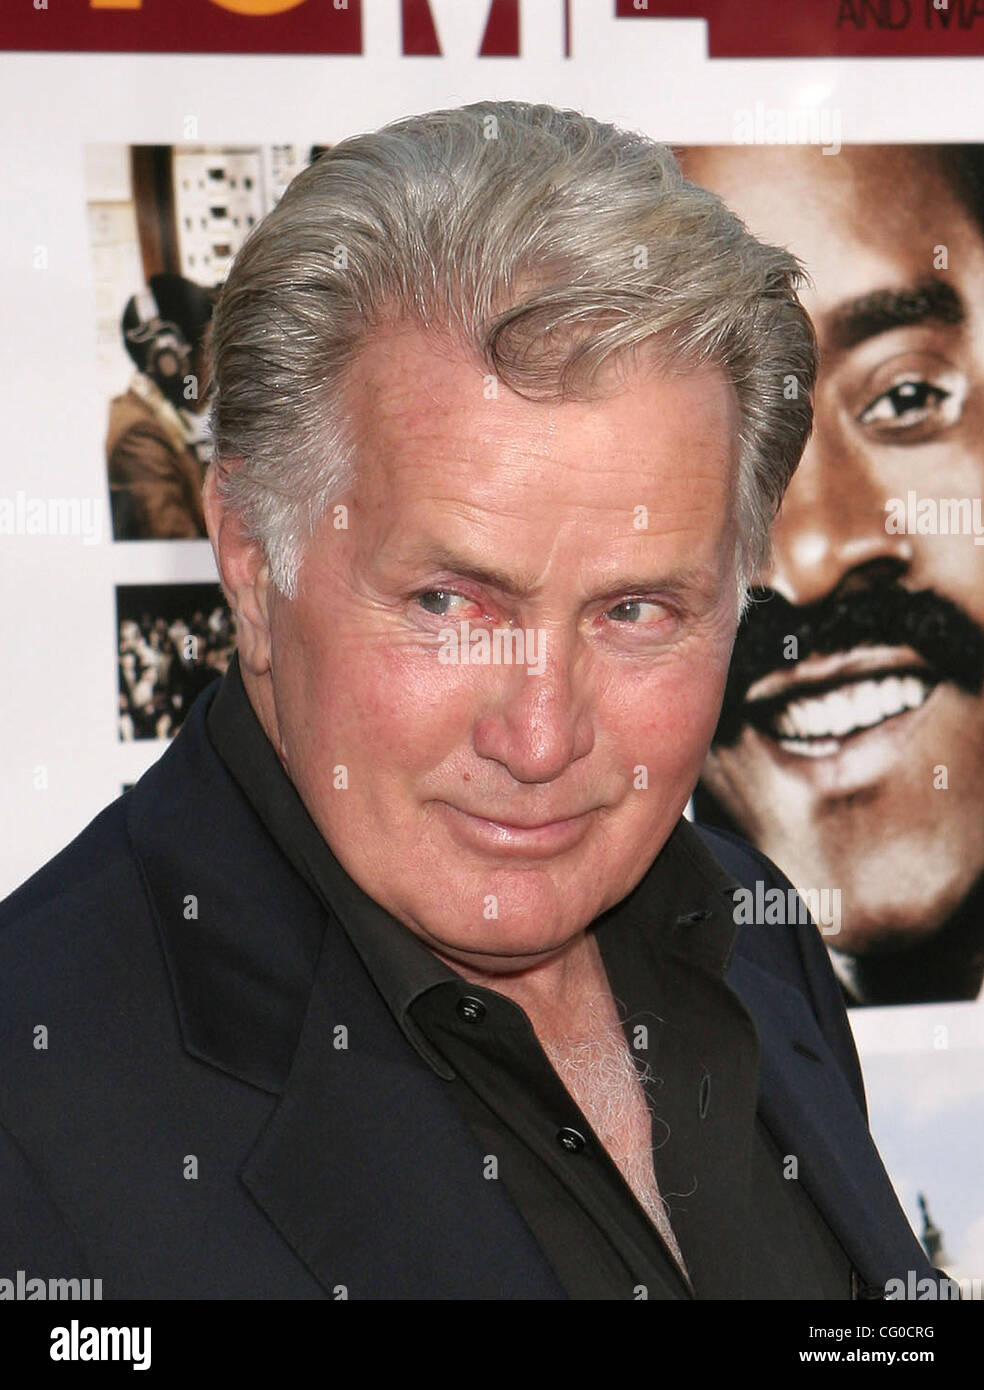 Jun 22, 2007; Hollywood, California, USA;  Actor MARTIN SHEEN at the 'Talk To Me' Opening Night Los Angeles Film Festival held at the Mann Village Theatre, Westwood. Mandatory Credit: Photo by Paul Fenton/ZUMA Press. (©) Copyright 2007 by Paul Fenton Stock Photo